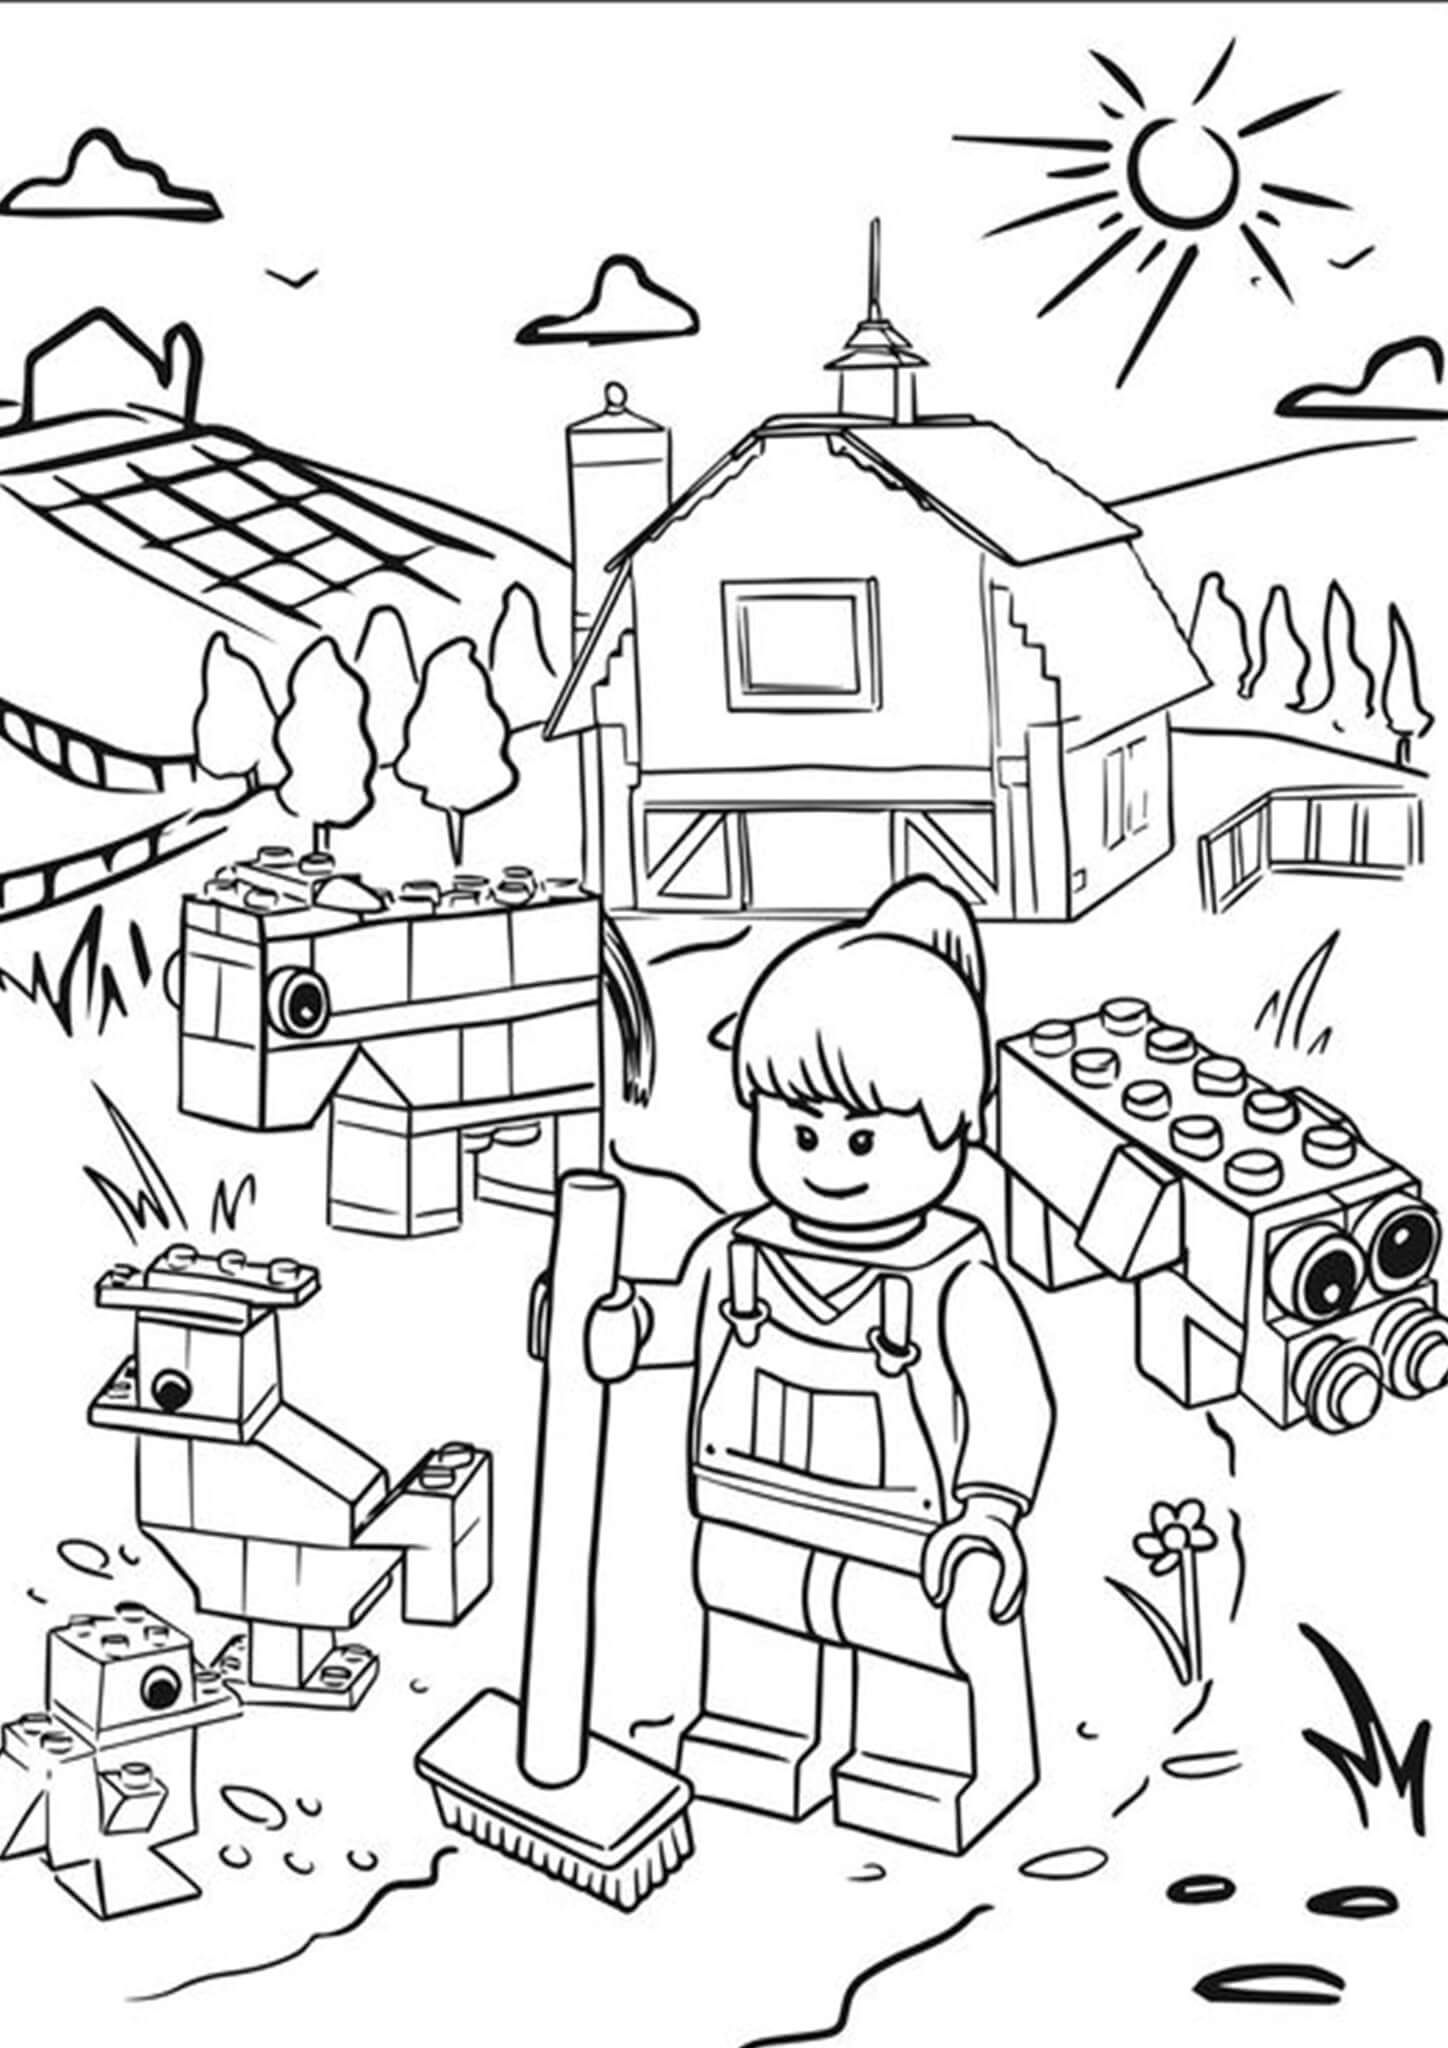 Free easy to print lego coloring pages lego coloring pages lego coloring unicorn coloring pages